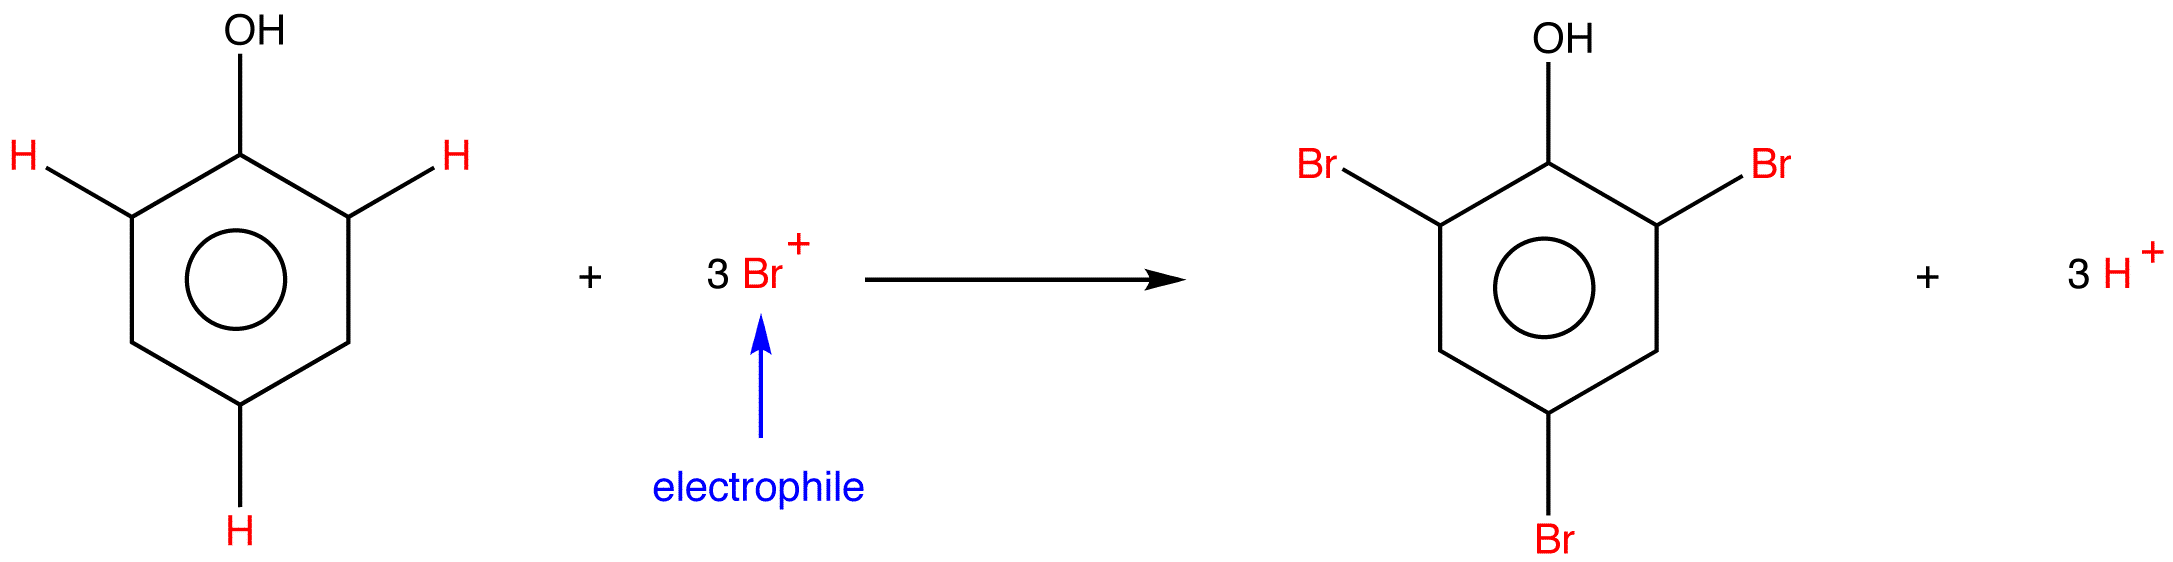 electrophilicaromaticsubstitution4.png